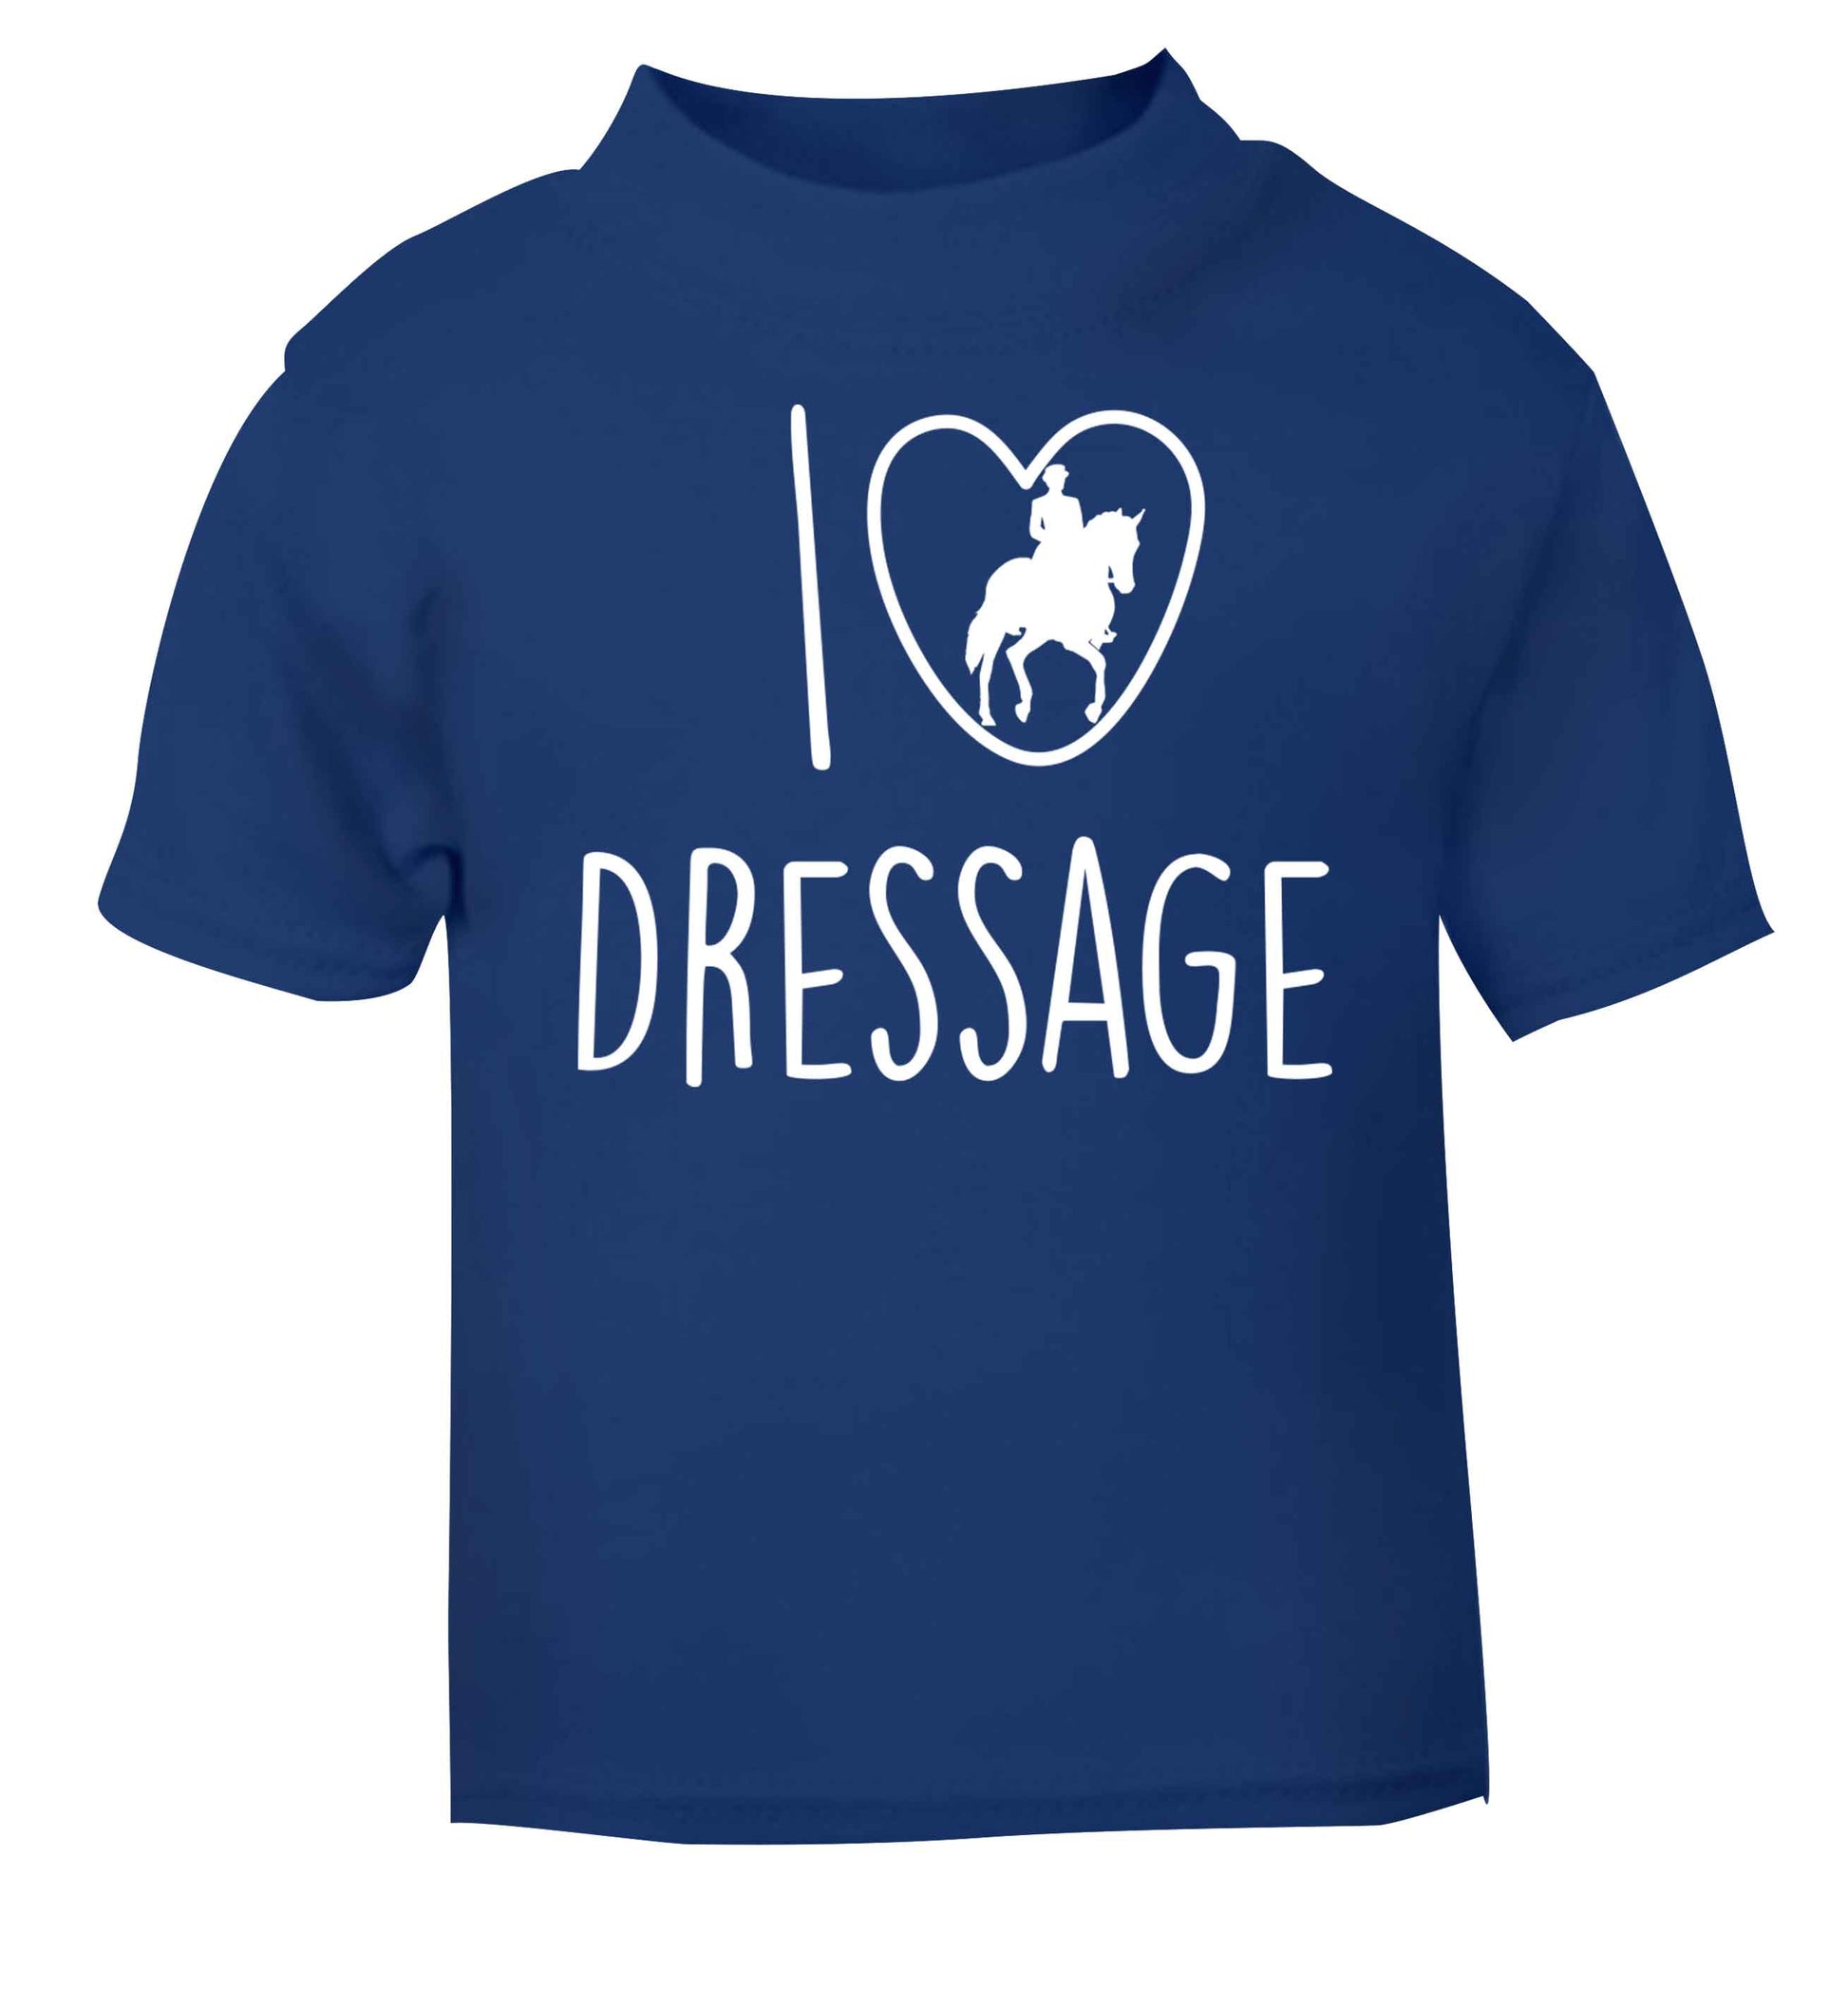 I love dressage blue baby toddler Tshirt 2 Years